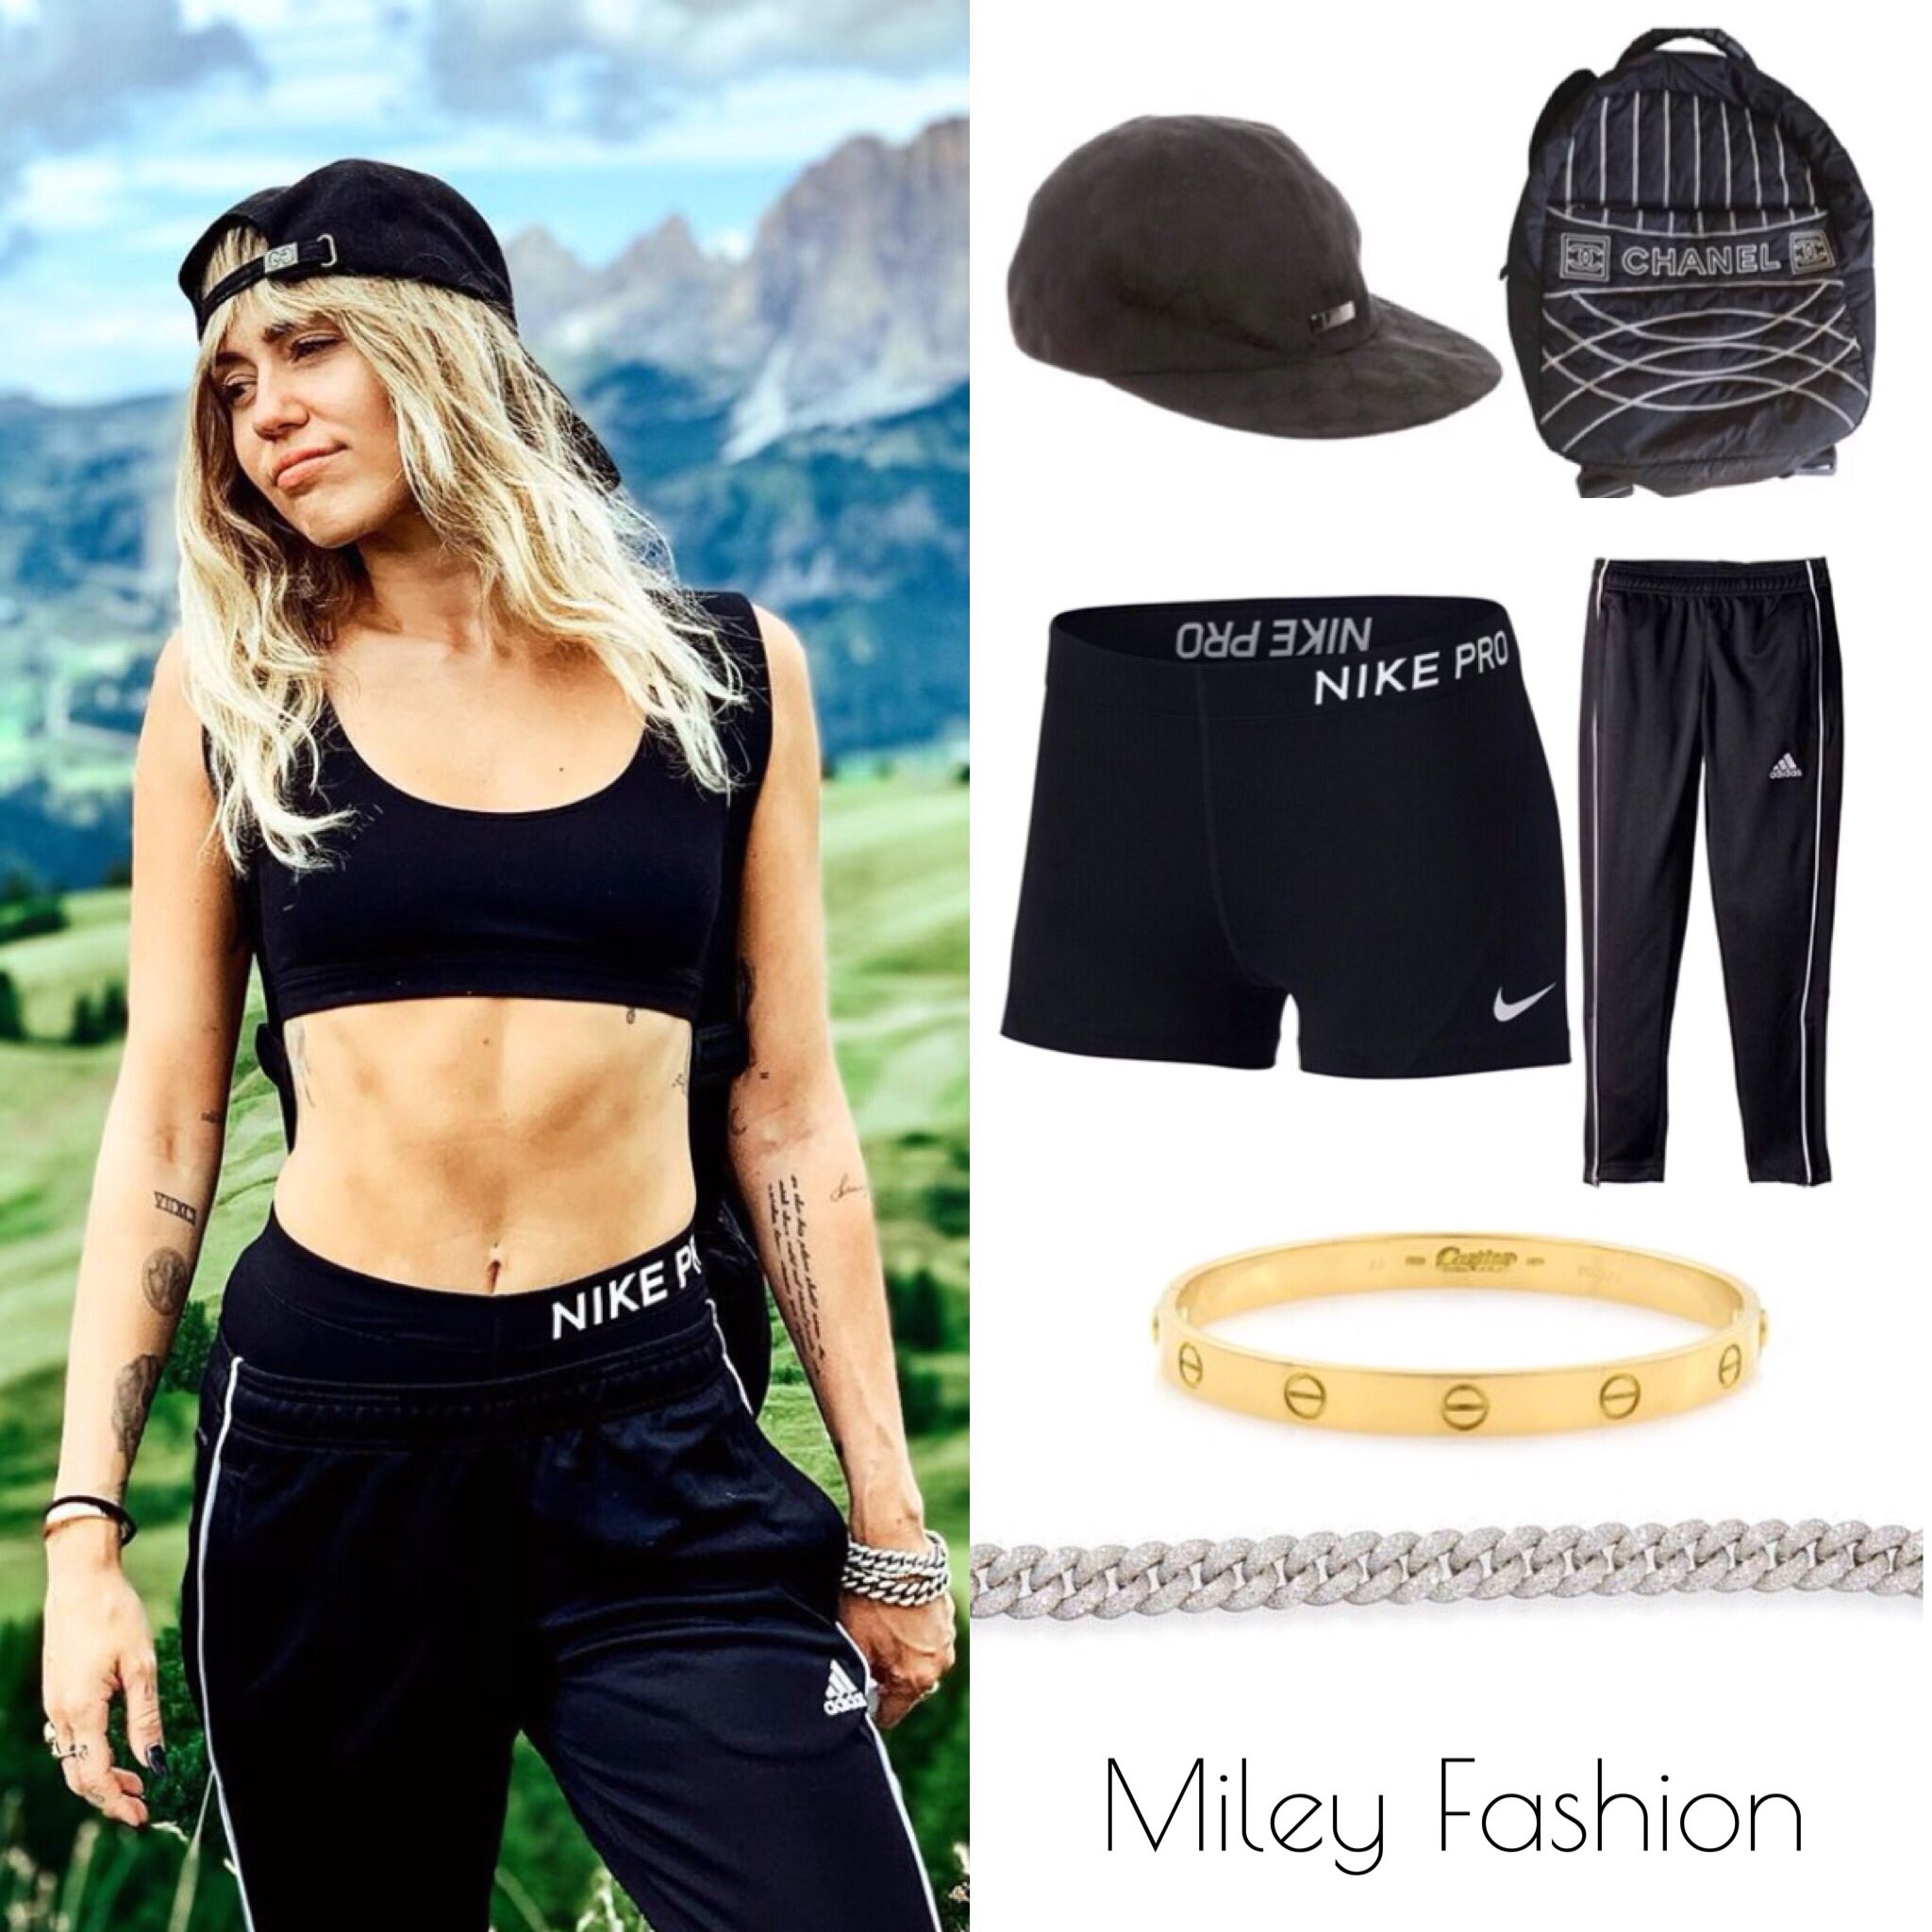 Miley Cyrus Fashion on Twitter: "{Style Guide} @mileycyrus visited The Dolomites in Italy wearing: • Gucci Monogram Baseball w/ Silver Accent • Chanel Sports Line Nylon Backpack • Nike Pro Training